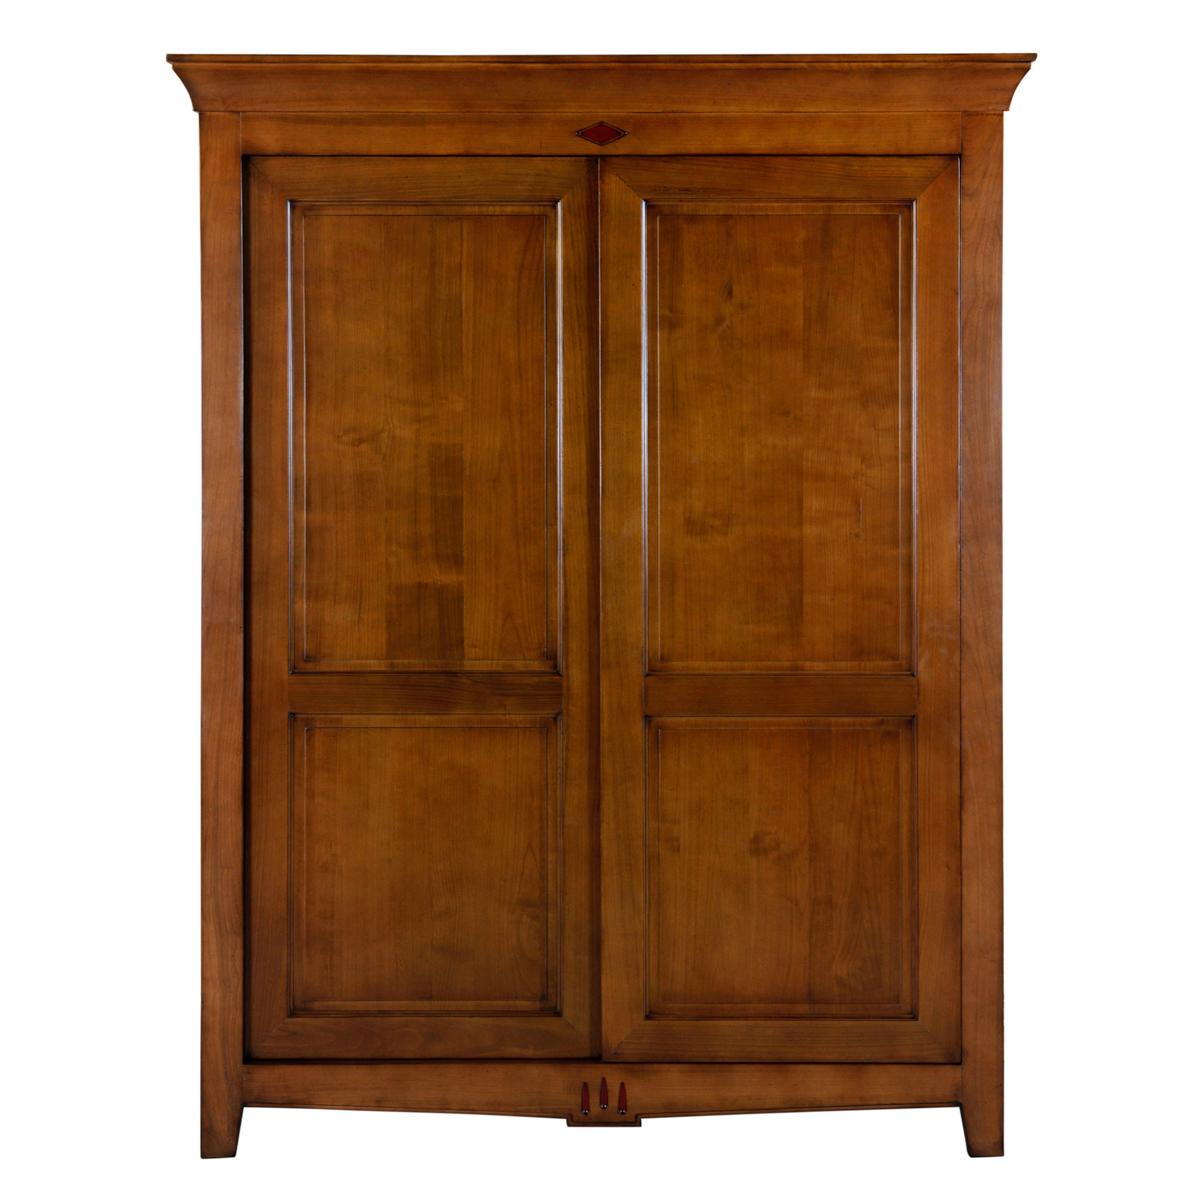 MELANIE Collection
This armoire is part of the Mélanie collection, a modern interpretation of the French Directoire style of the late 18th century. We find the straight, classic and timeless lines embellished with diamonds, grooves or cartouches on